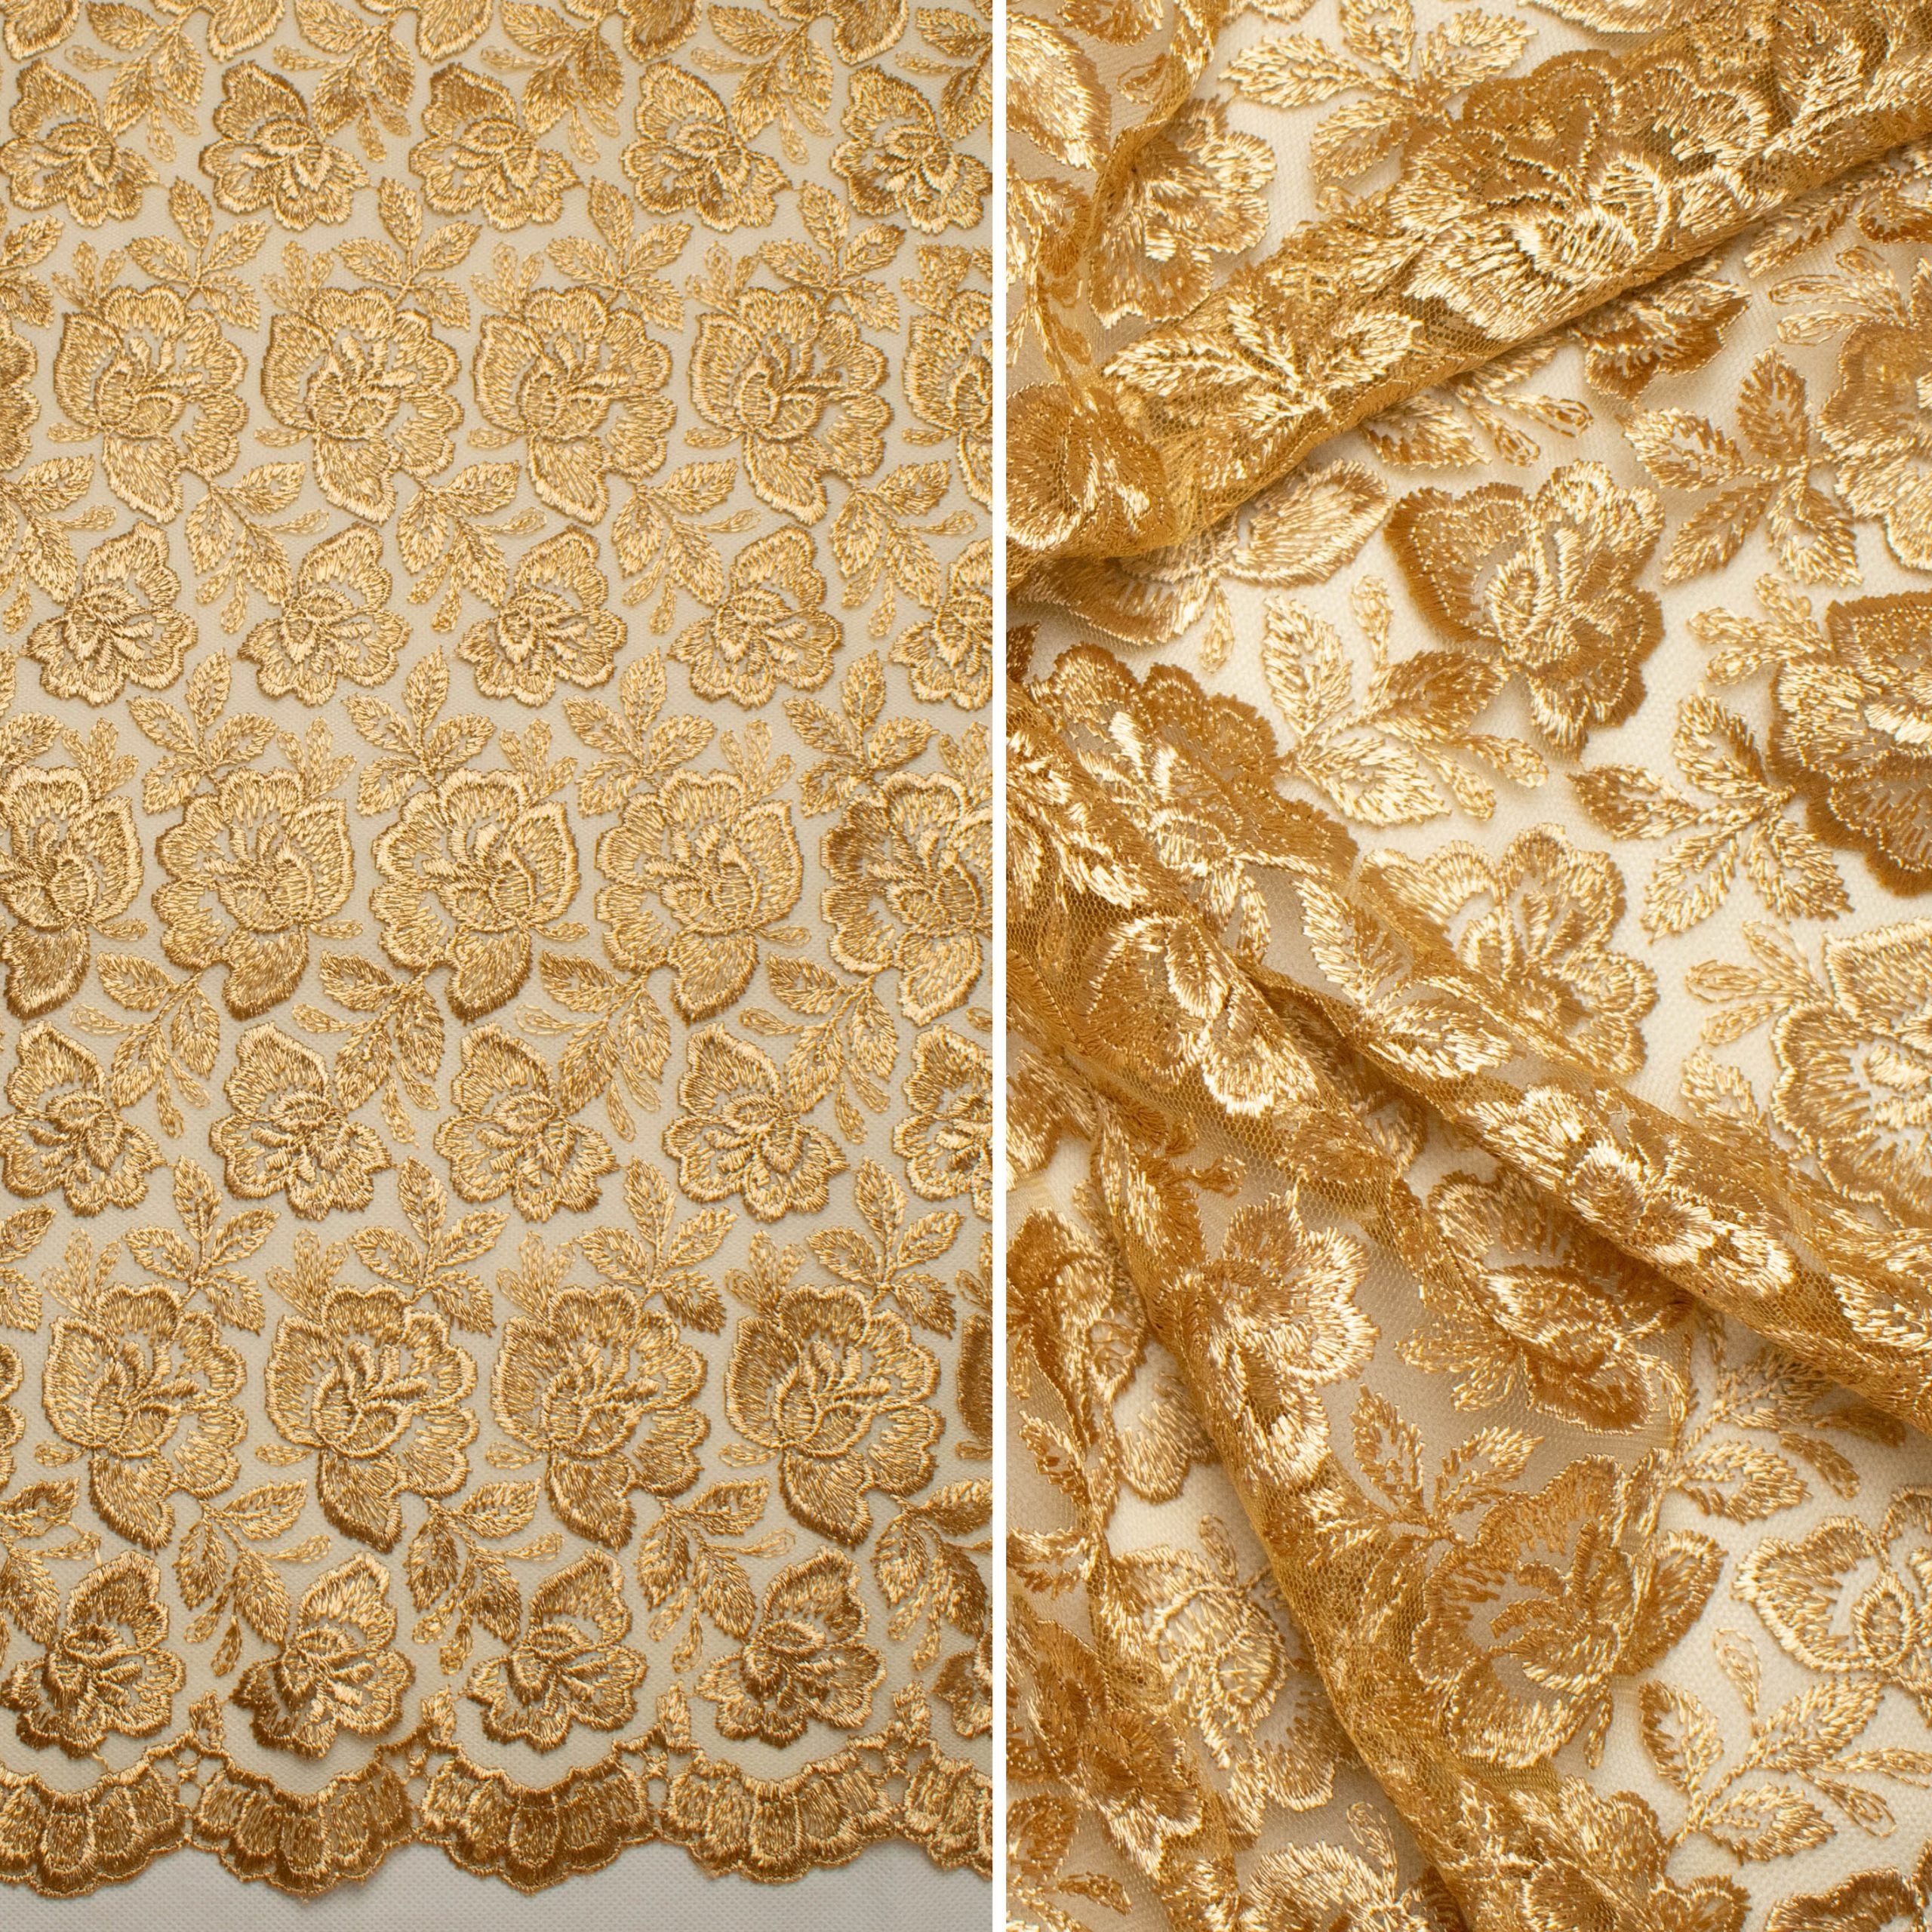 Lace Fabric - Yellow - Floral Mesh Fancy Lace Design Fabric By The Yard